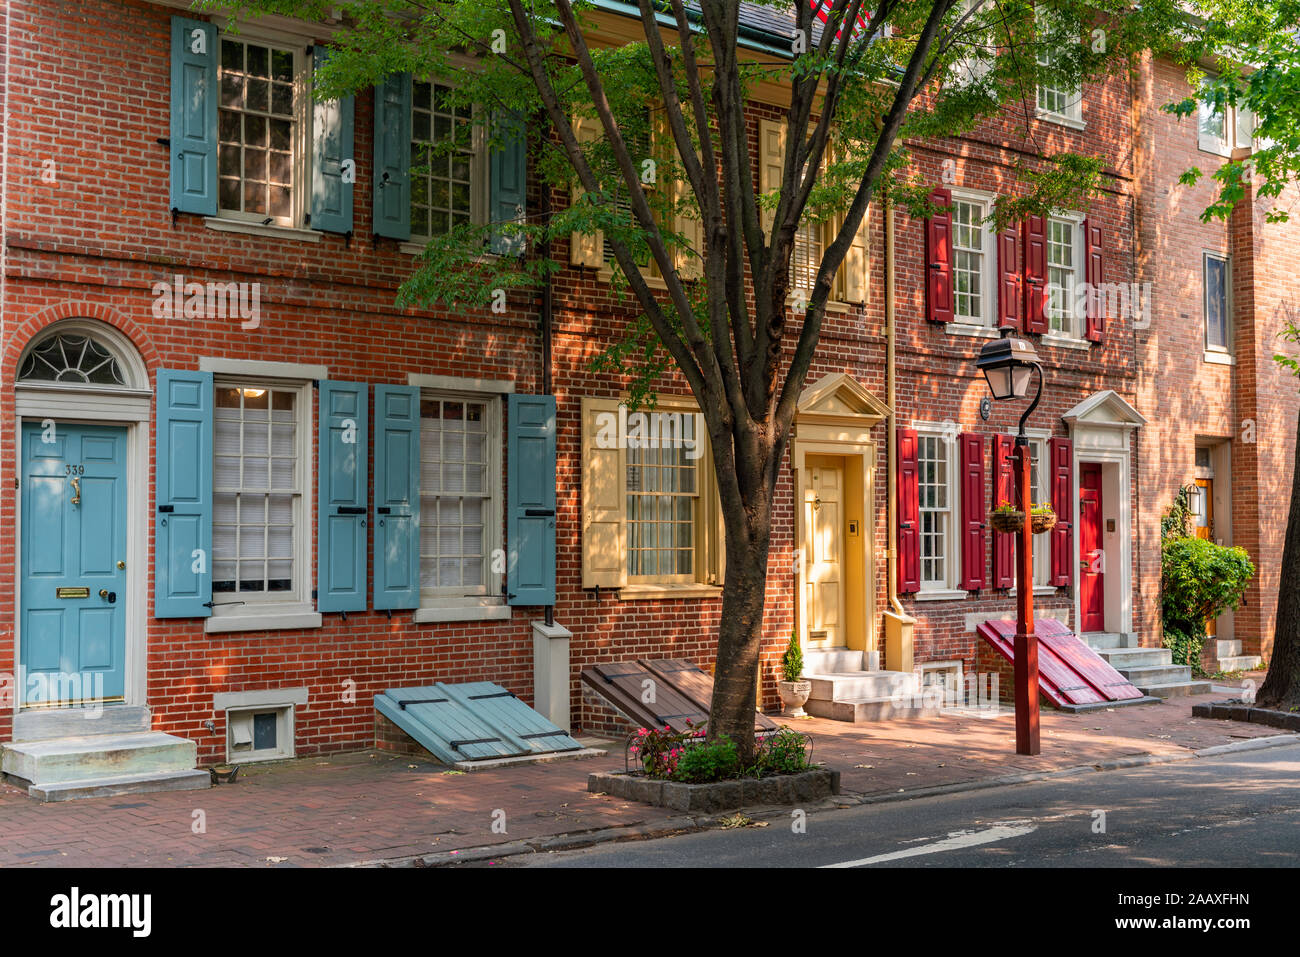 Afternoon sunshine lights up colourful wooden shutters on historic row houses in South 4th Street, Society Hill. Stock Photo